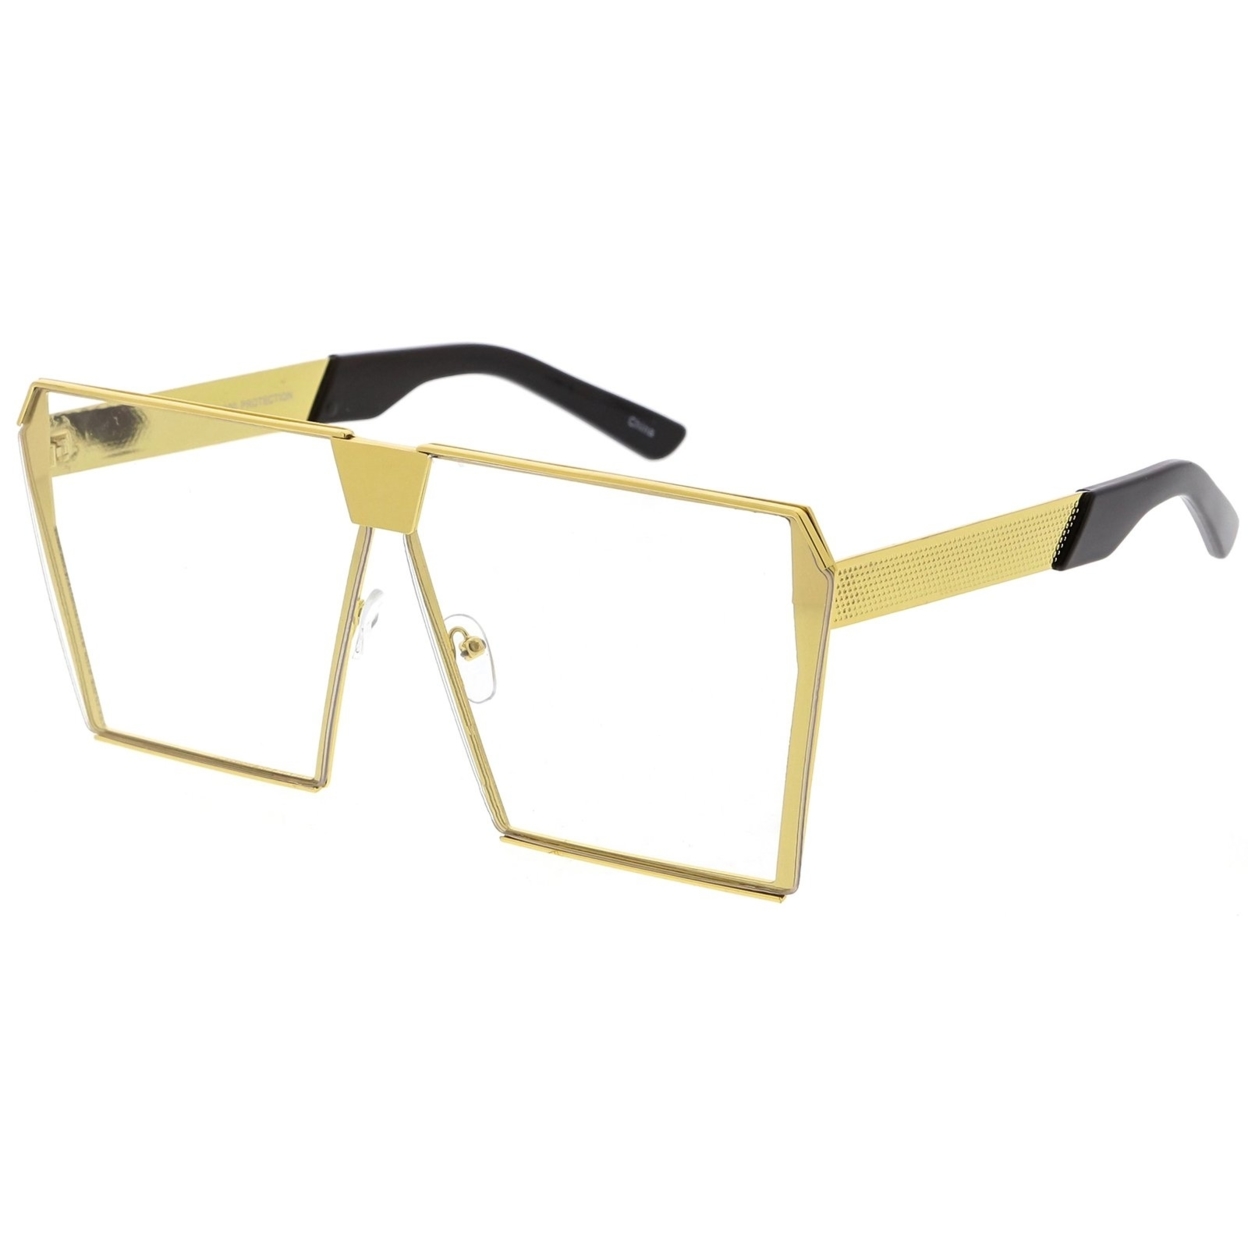 Modern Oversize Semi Rimless Square Eyeglasses With Clear Flat Lens 69mm - Yellow Gold / Clear